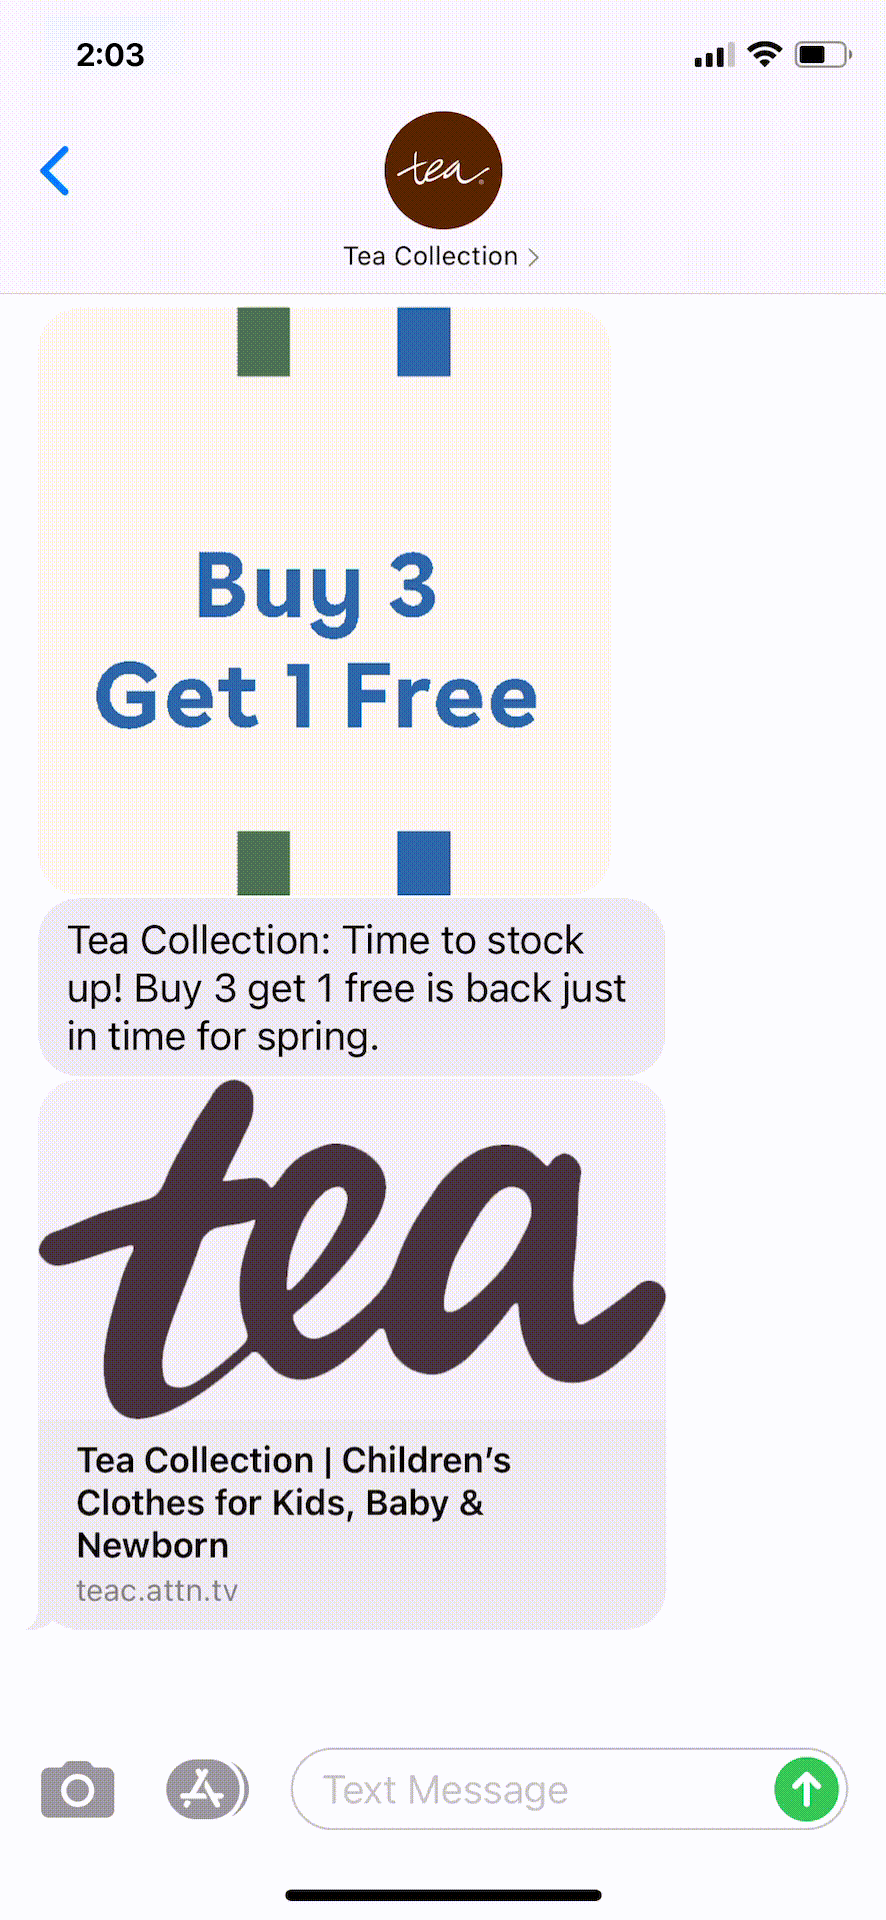 Tea-Collection-Text-Message-Marketing-Example-03.04.2021_1